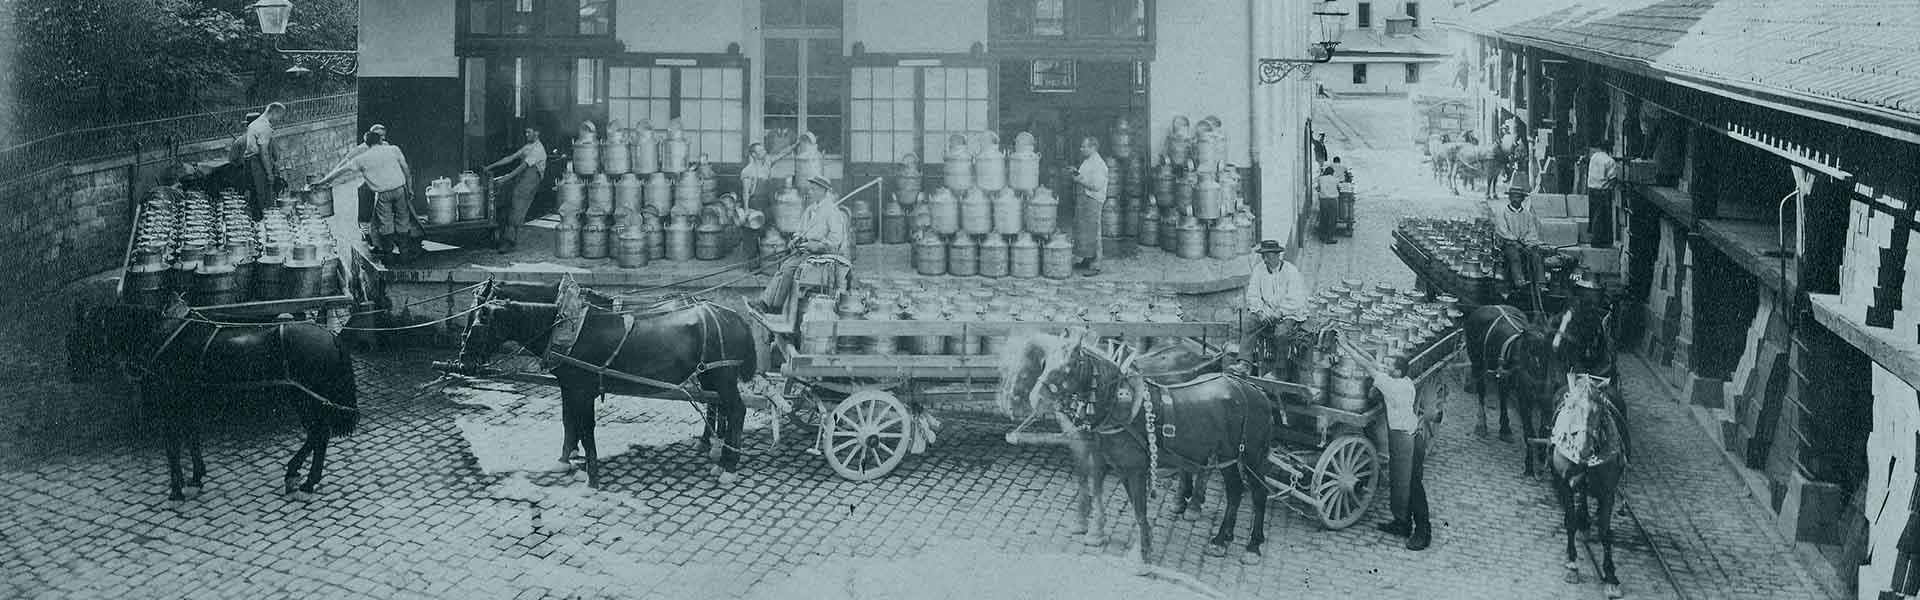 Milk deliveries arriving by horse and cart at the Nestlé company factory in Vevey, Switzerland